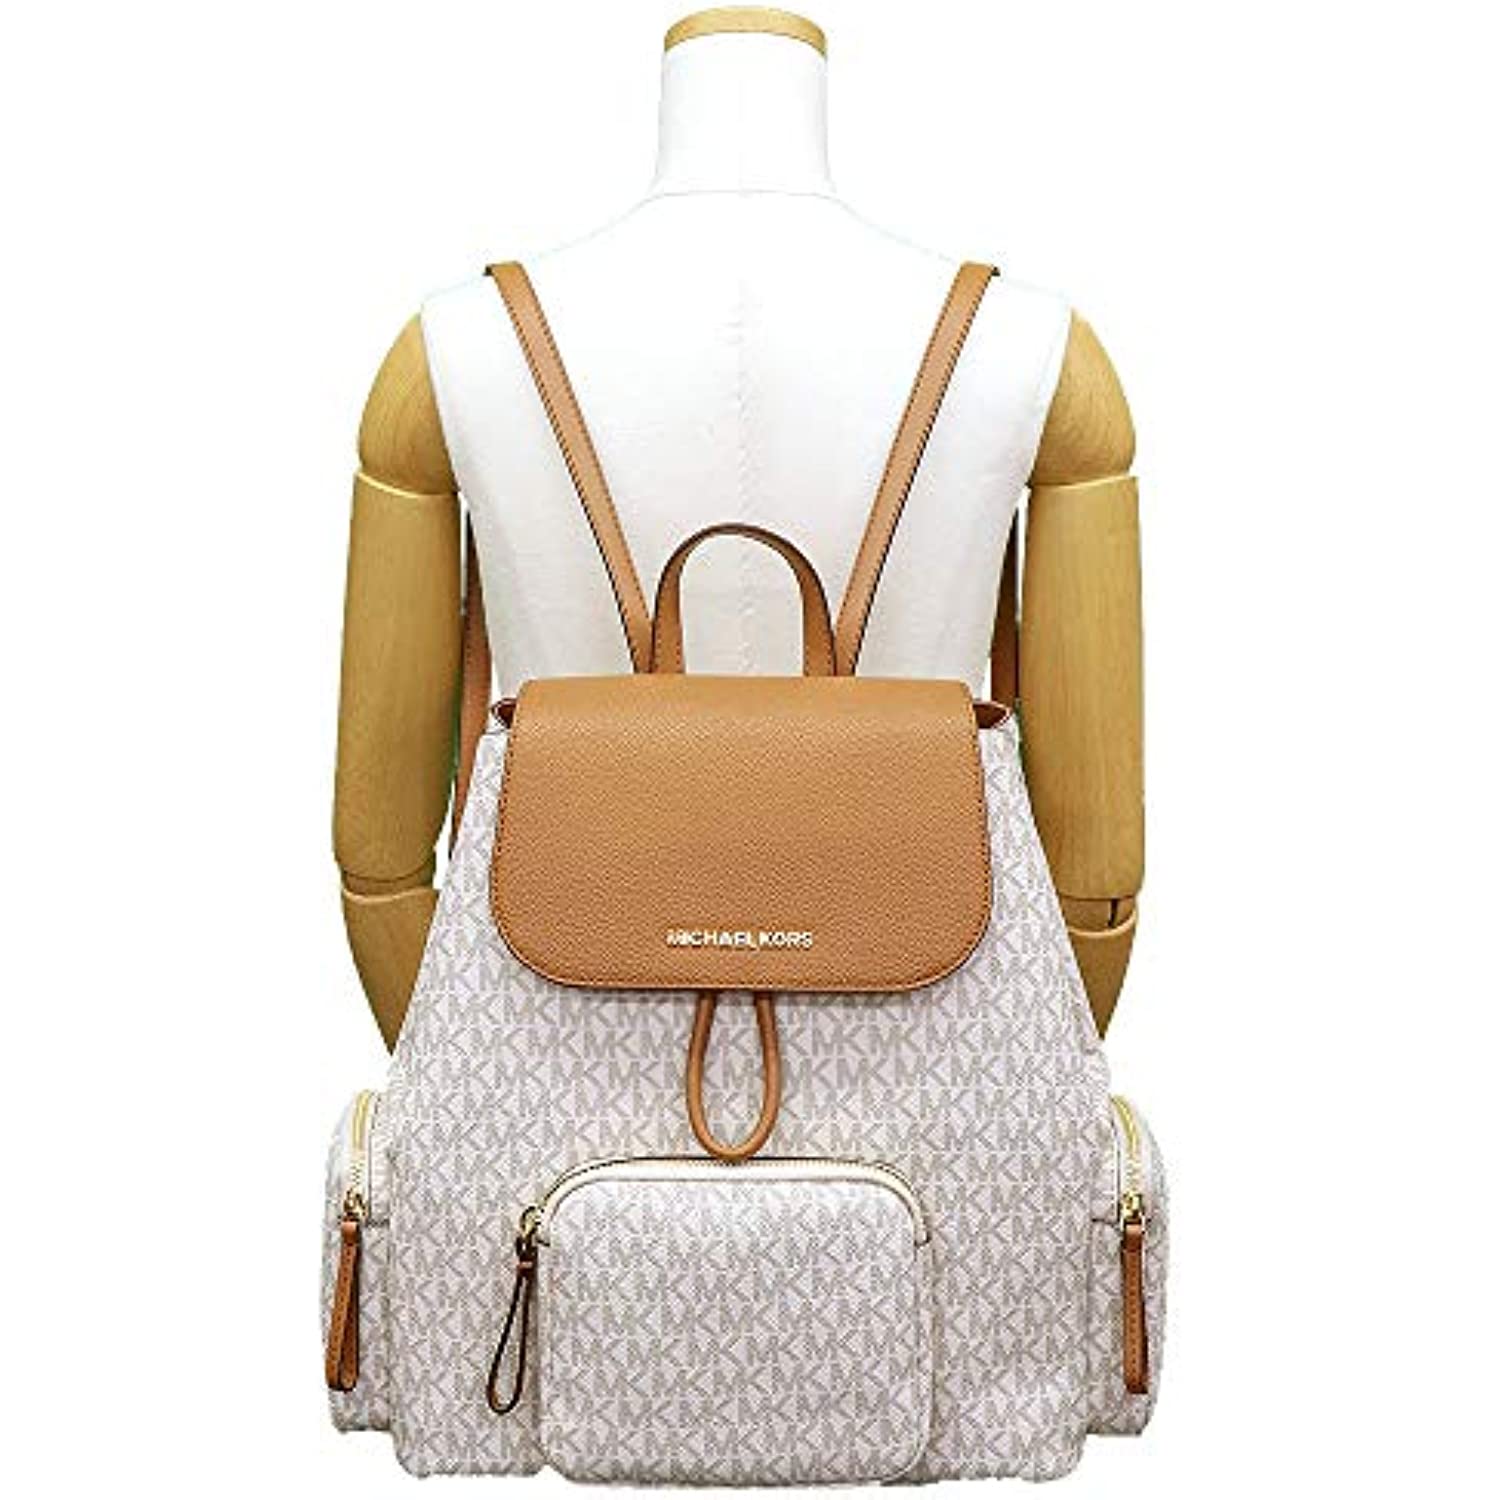 MICHAEL KORS ABBEY MD CARGO BACKPACK  WHAT FITS INSIDE  SUMMER EDITION  2020  YouTube